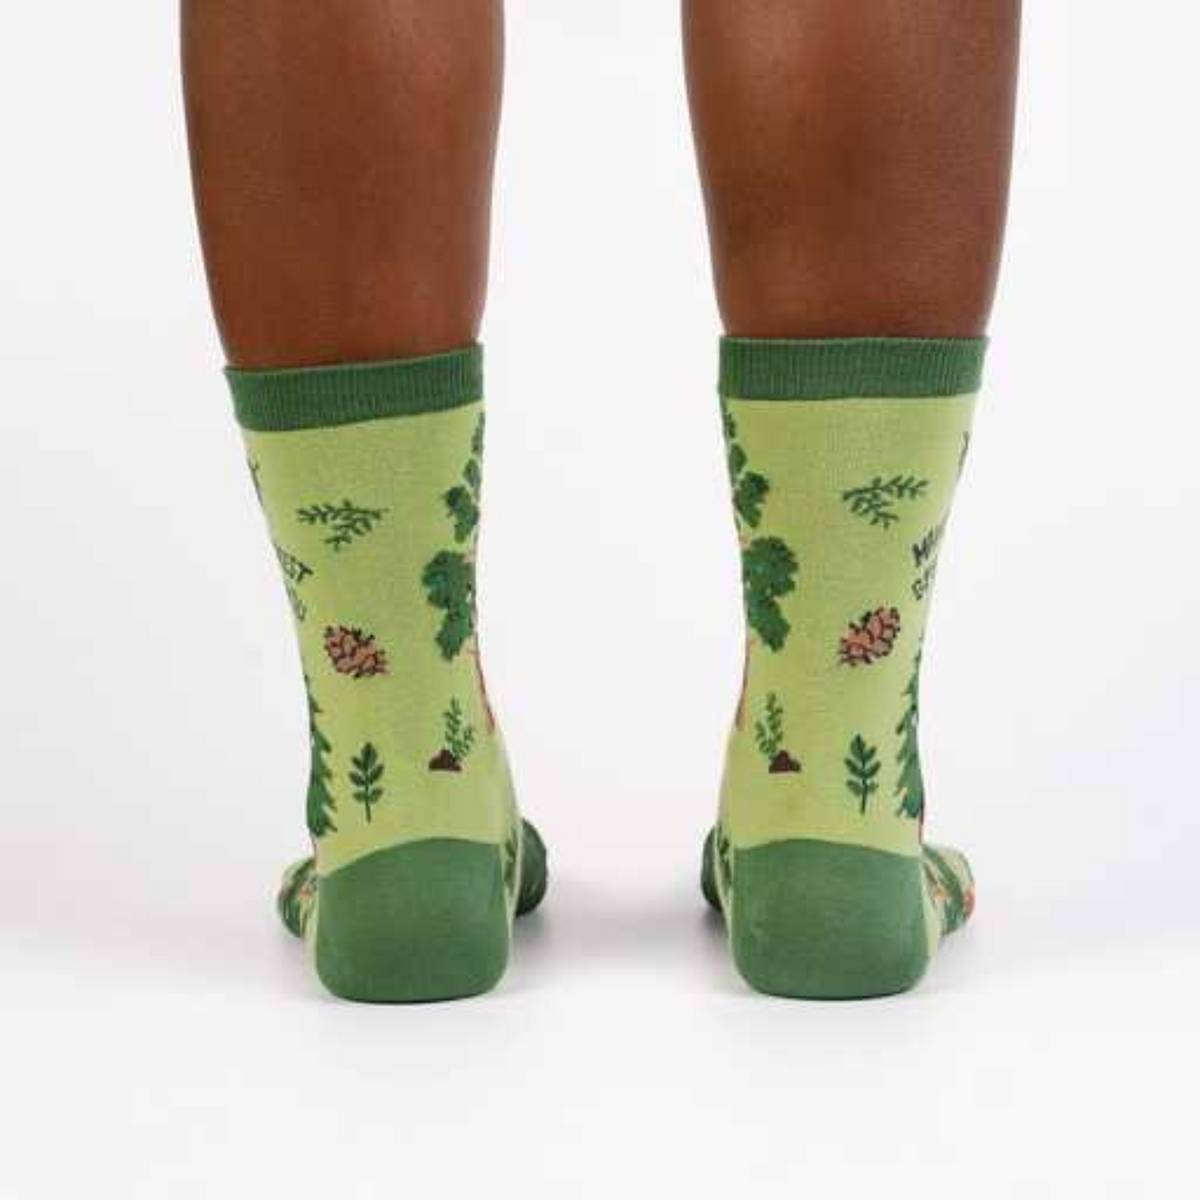 Sock It To Me May the Forest Be With You women&#39;s crew sock featuring a green sock with trees and pinecones and &quot;May the forest be with you&quot; written. Socks worn by model seen from behind. 